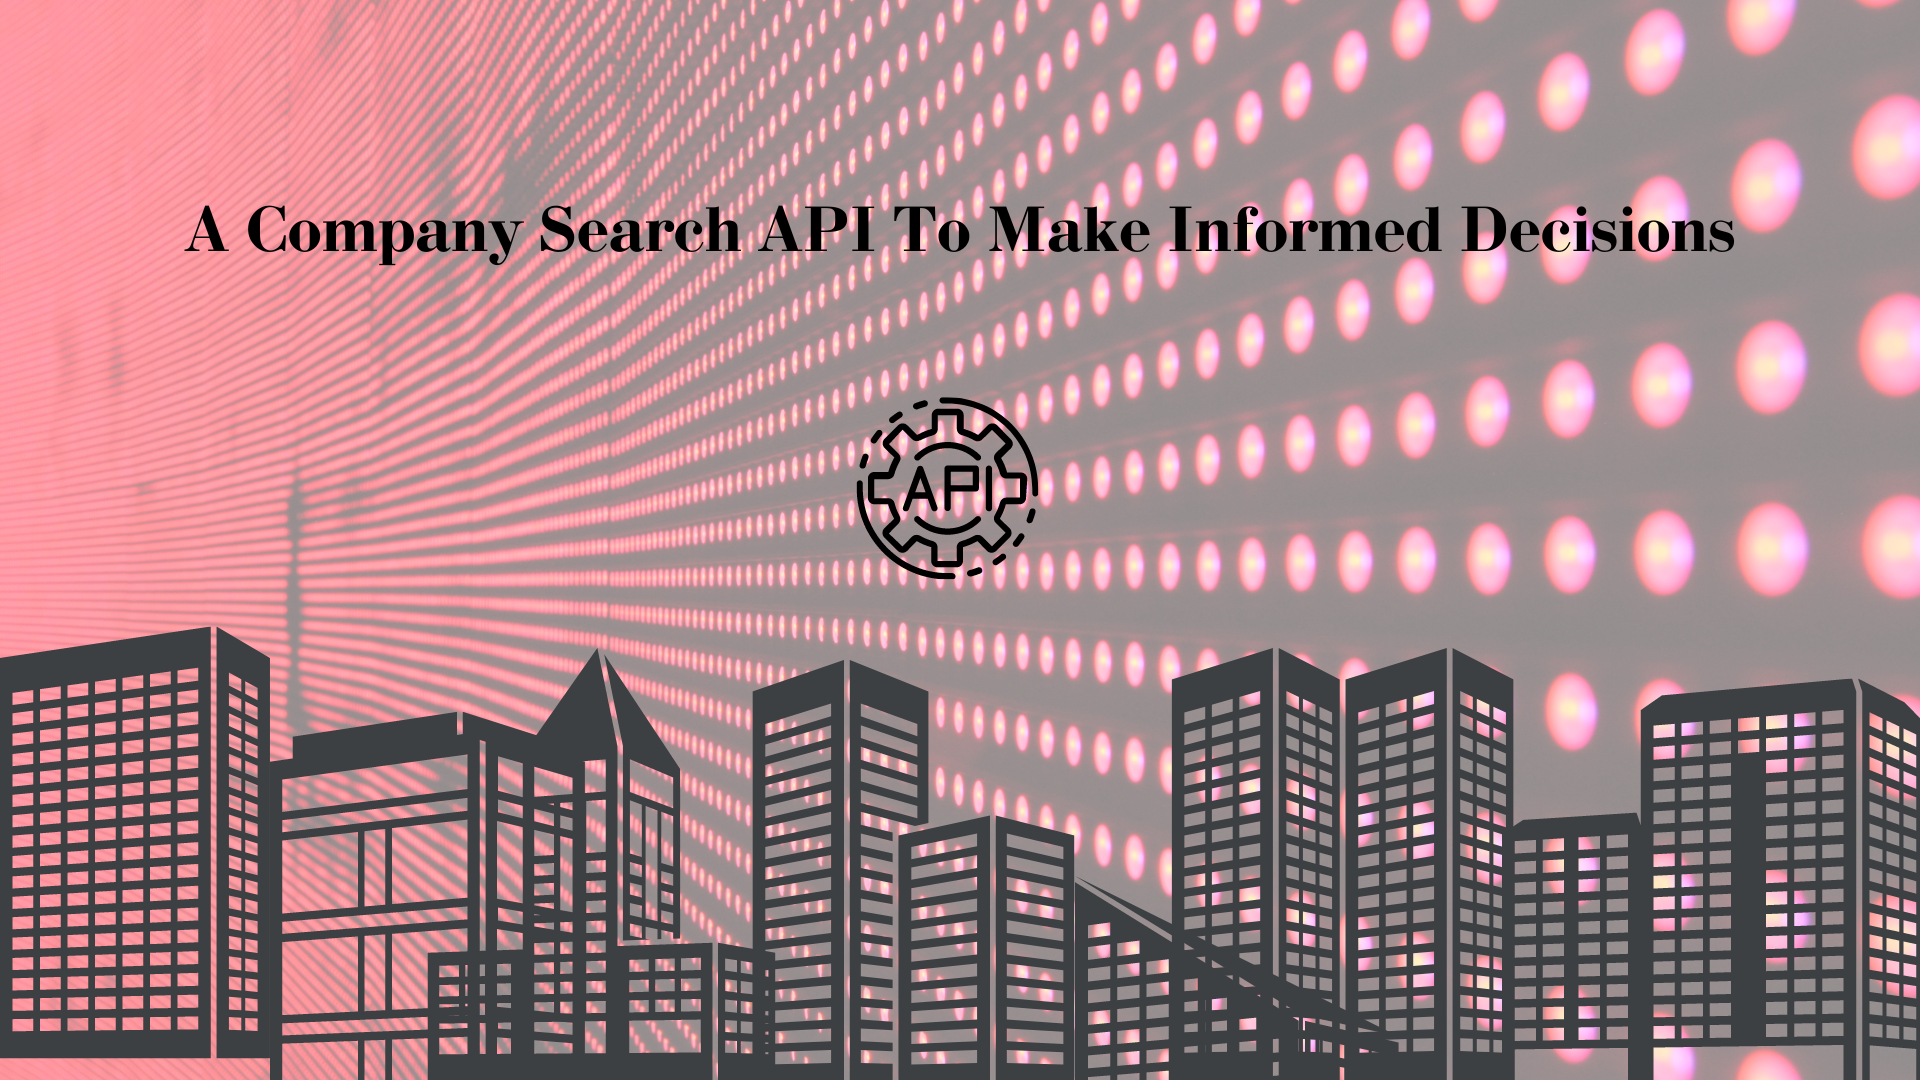 A Company Search API To Make Informed Decisions